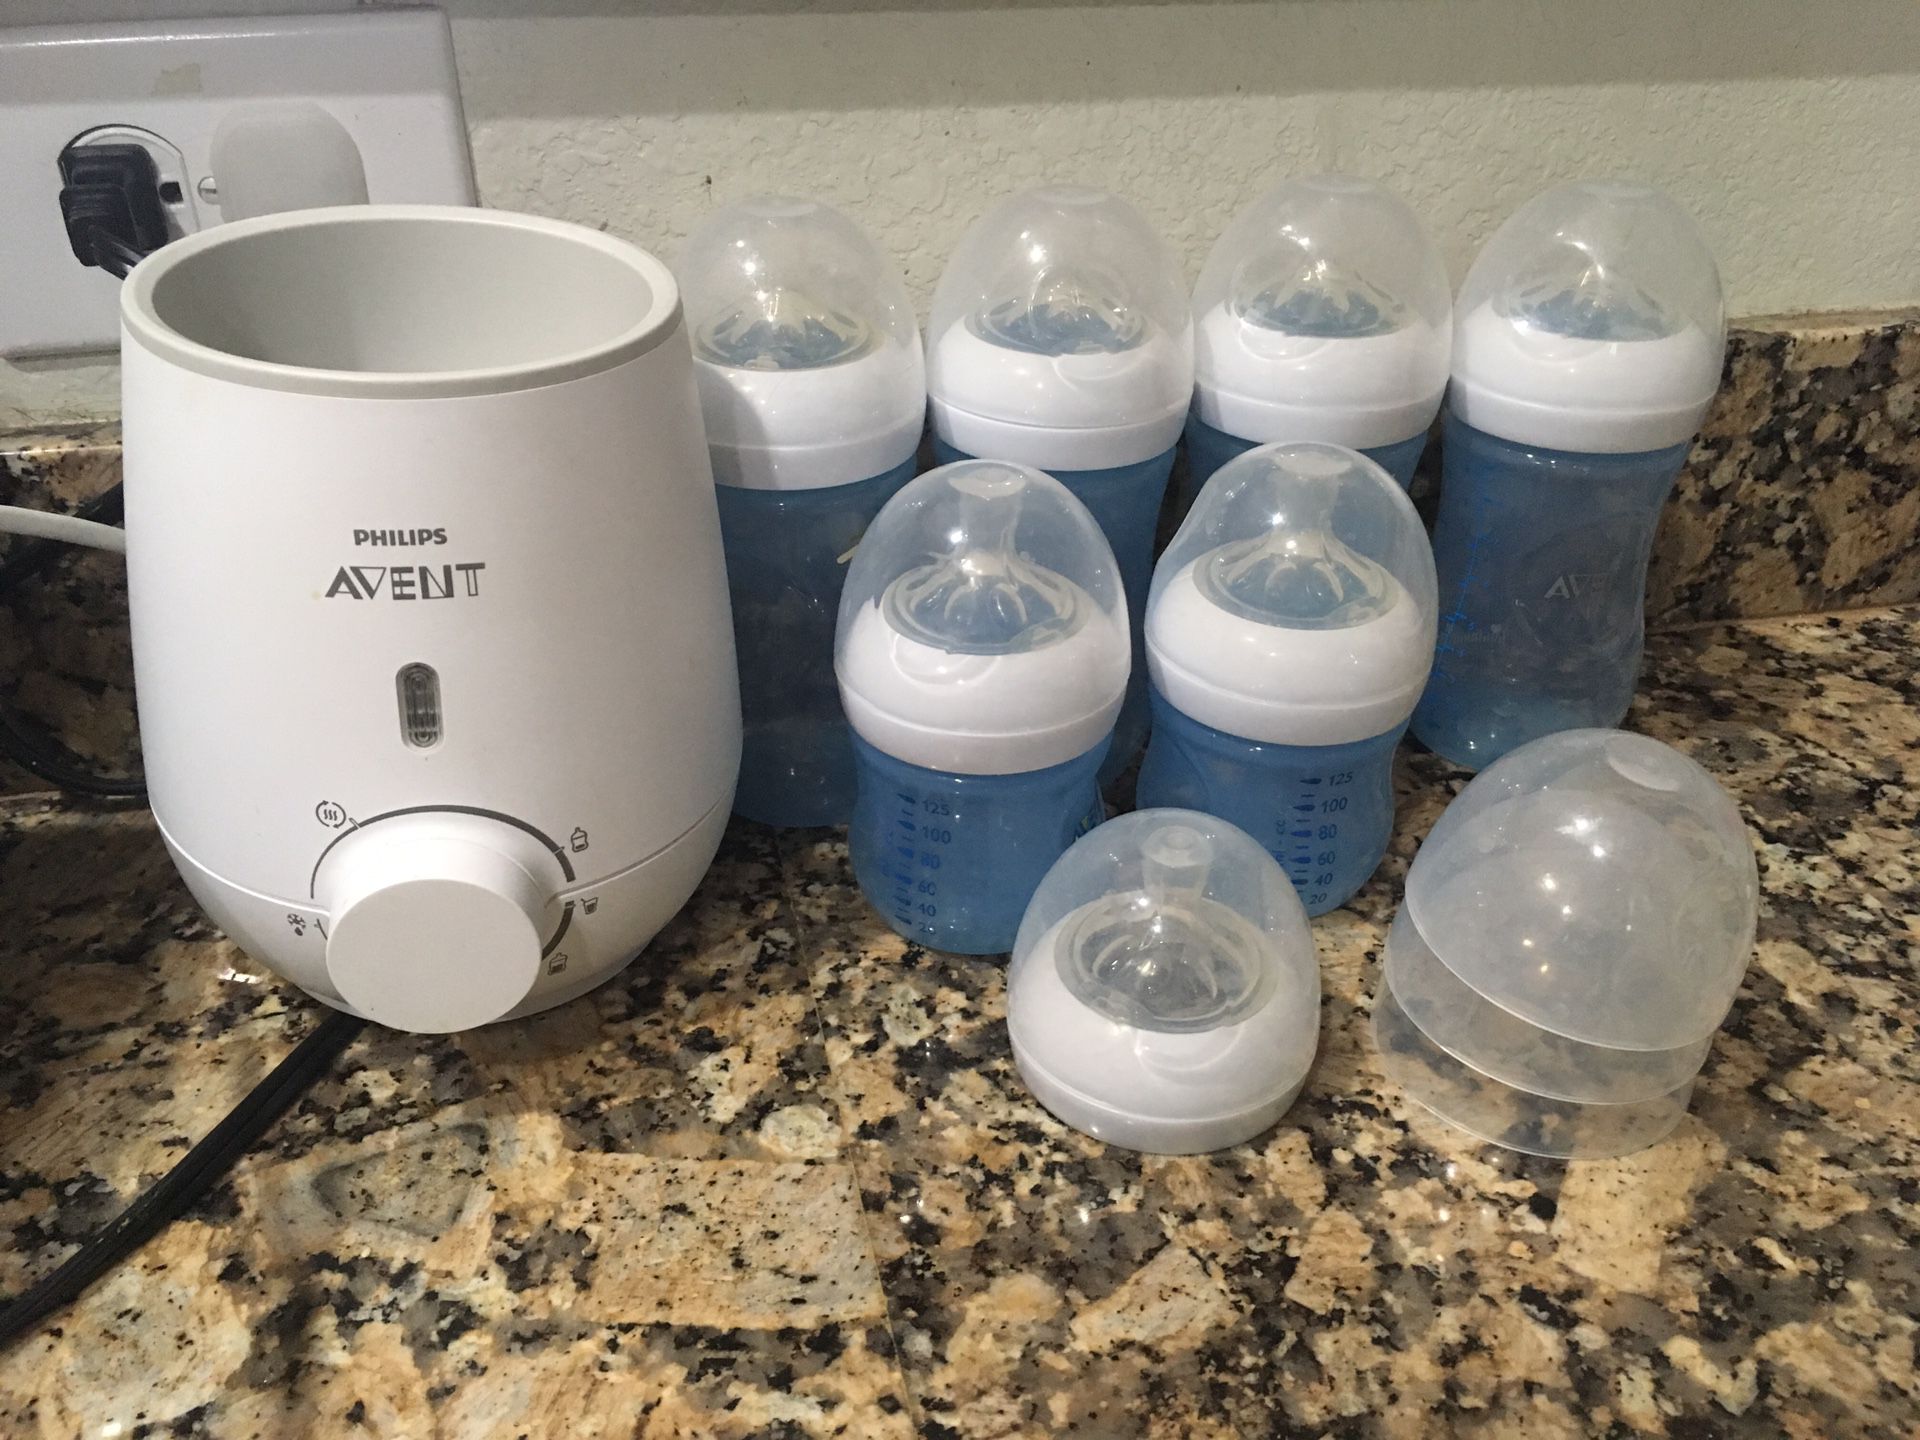 Avent baby bottles and warmer